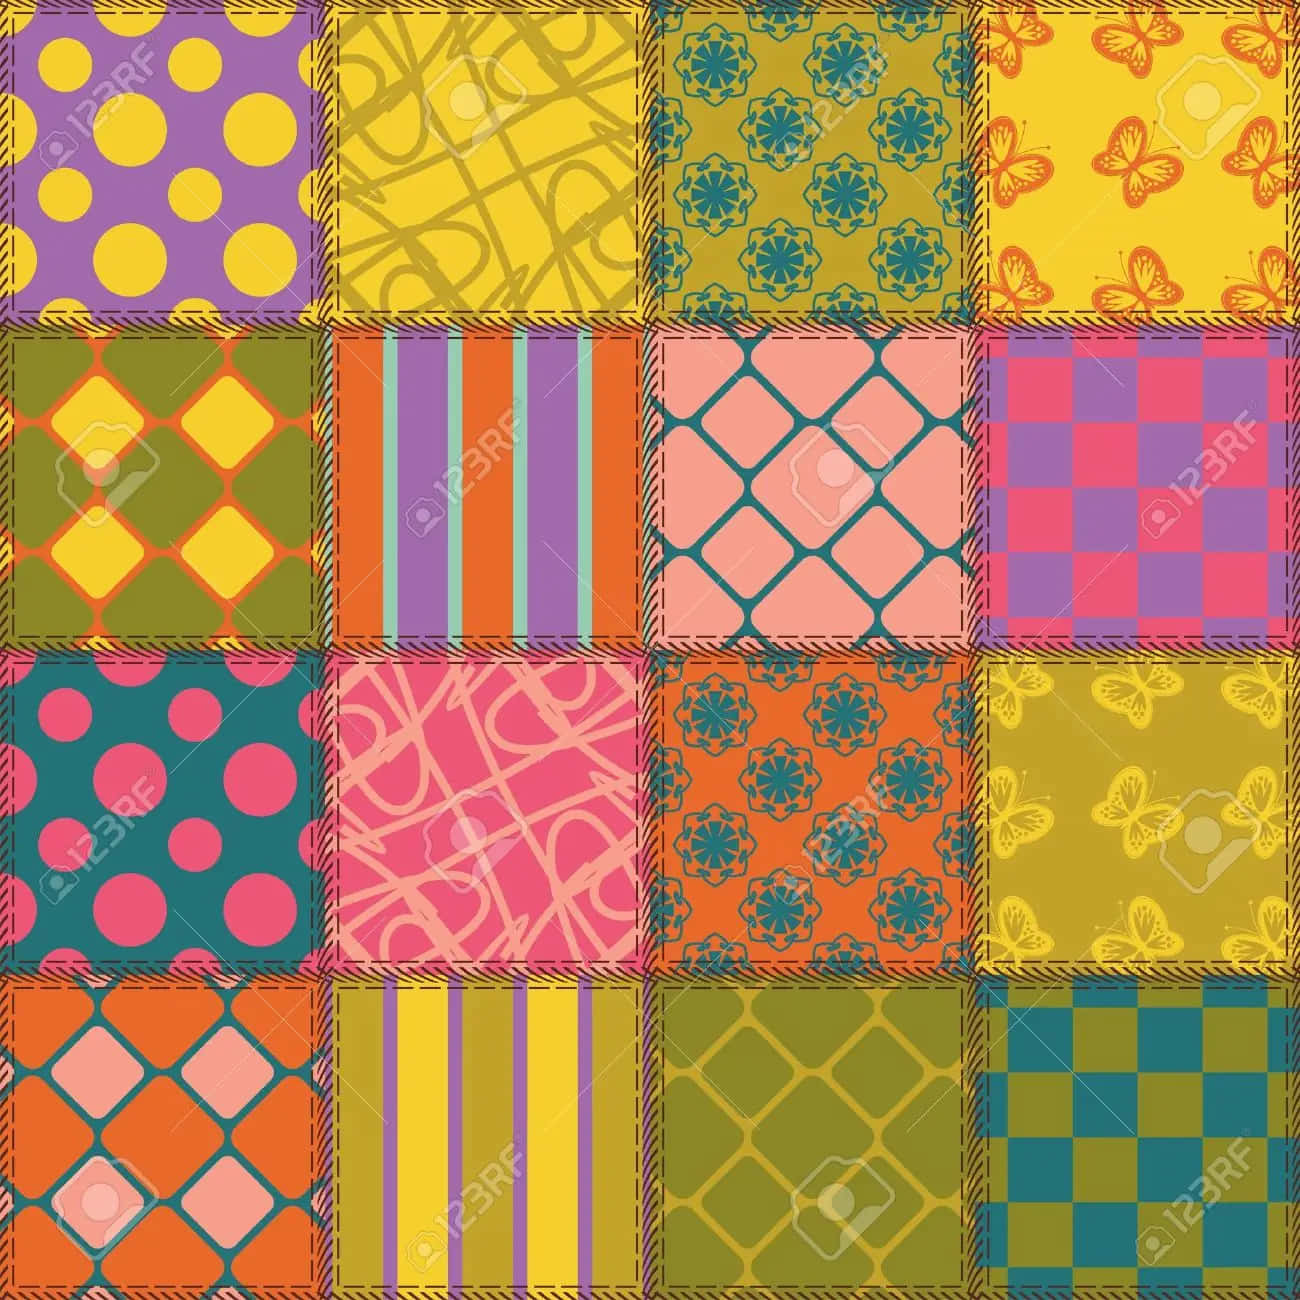 patchwork pattern with colorful squares and triangles stock vector Wallpaper